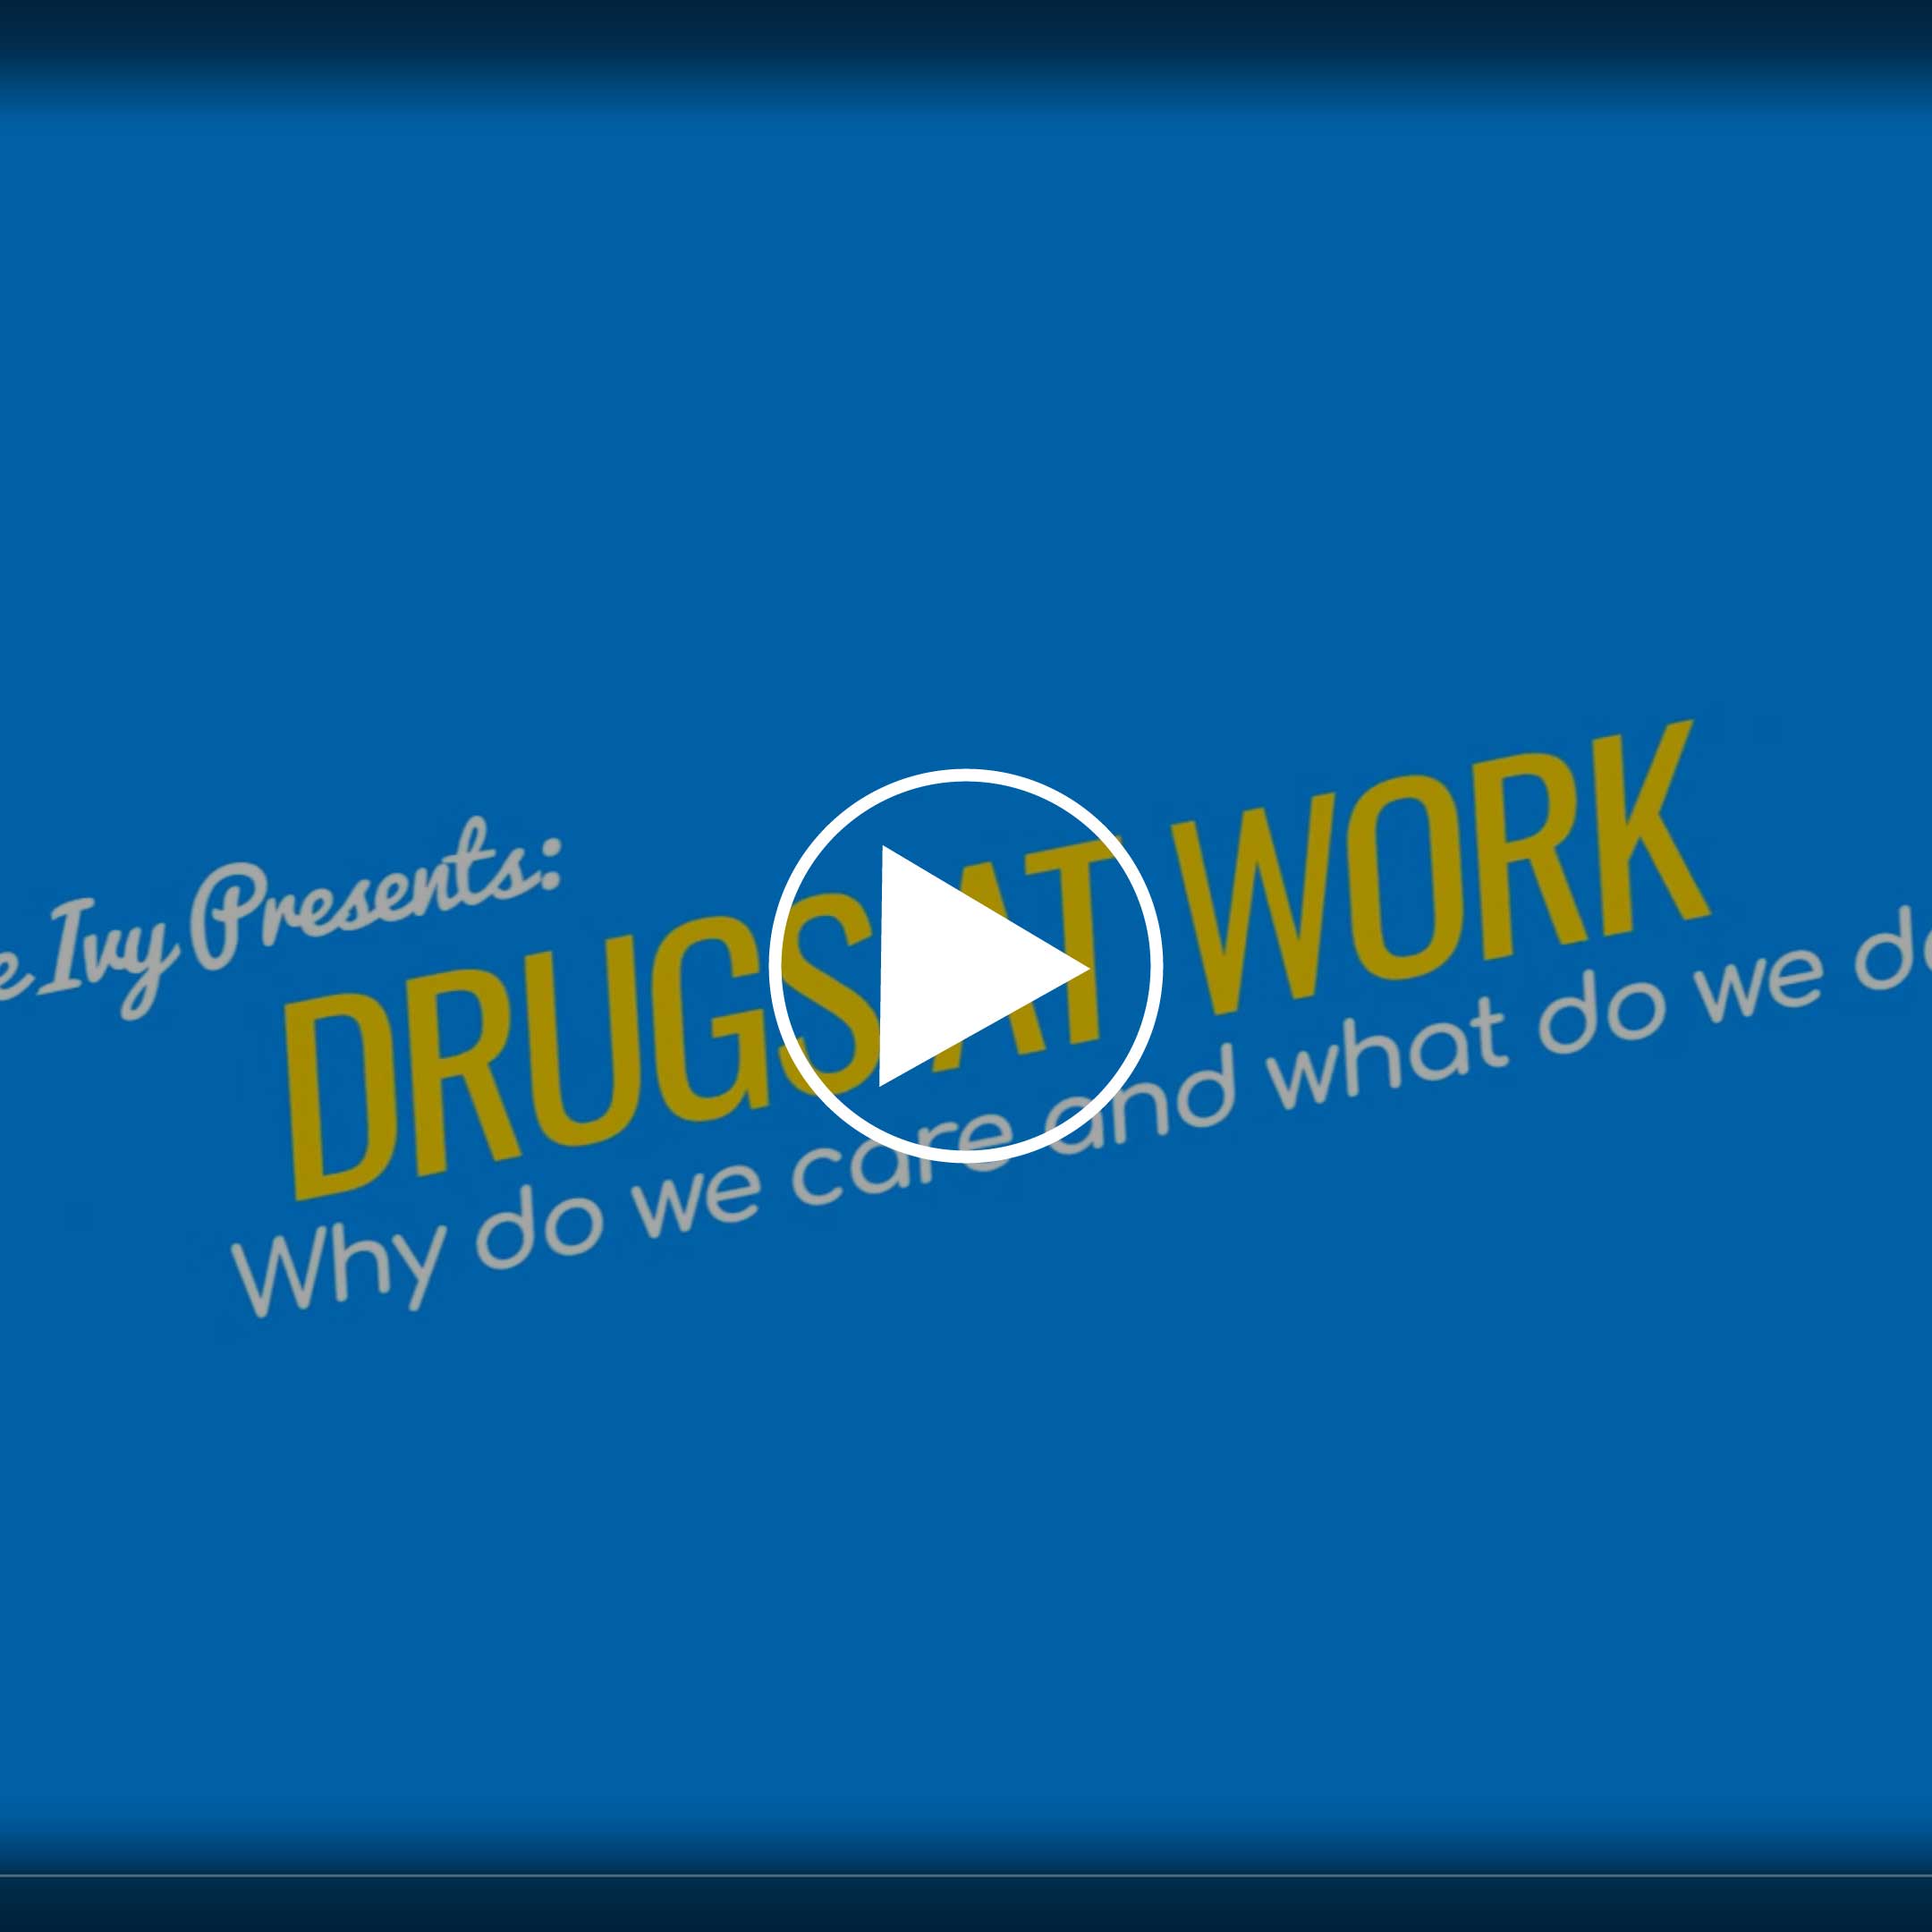 Image of Drugs at Work Video. Words on image say, Blue Ivy presents - Drugs at Work: Why do e care and what do we do? There is a blue background and the words are in white and yellow fonts.